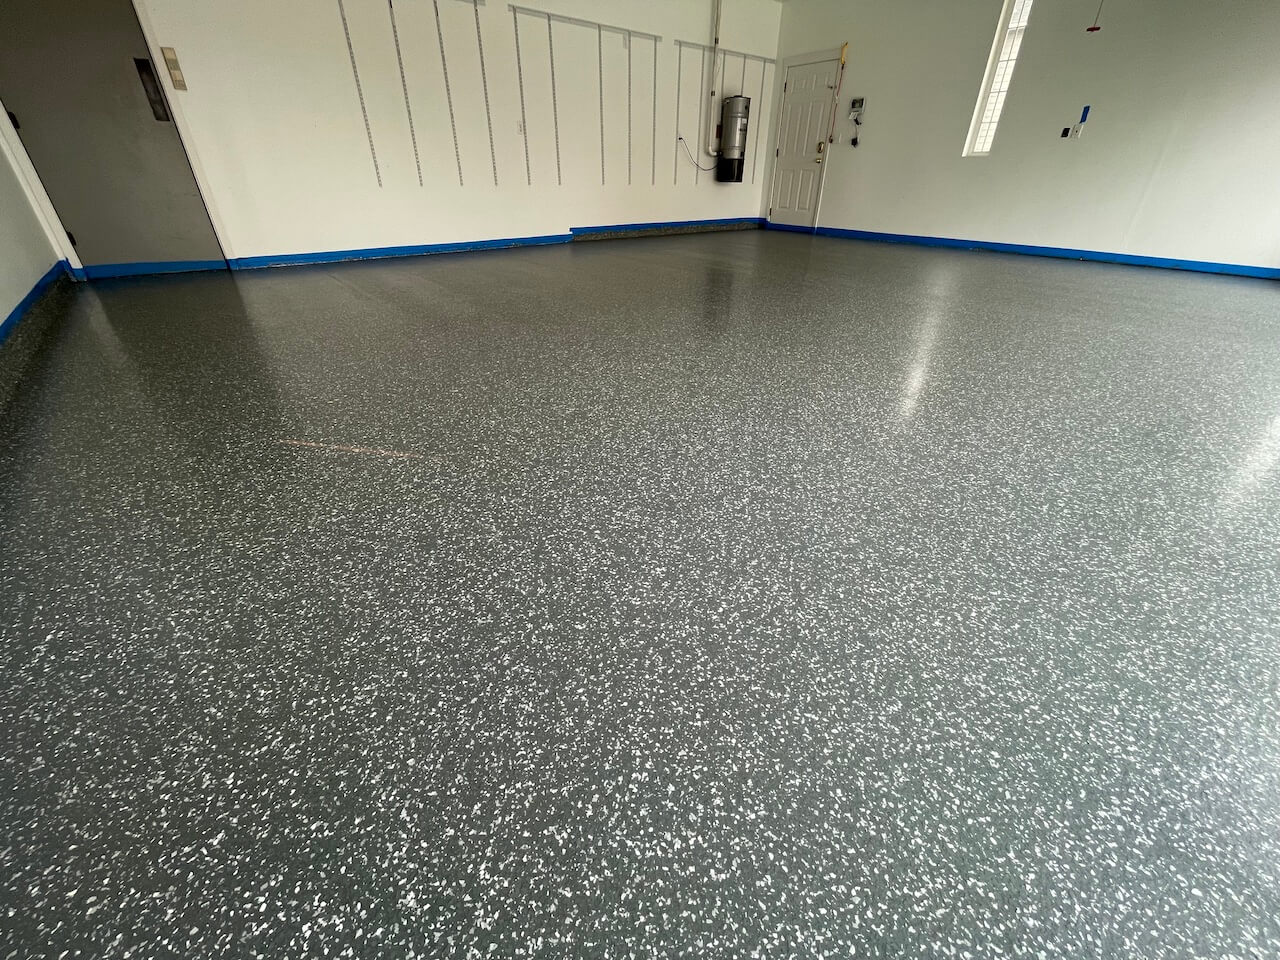 This garage features a flake or chip floor in black and white.  The flake floor is covered with an epoxy topcoat.